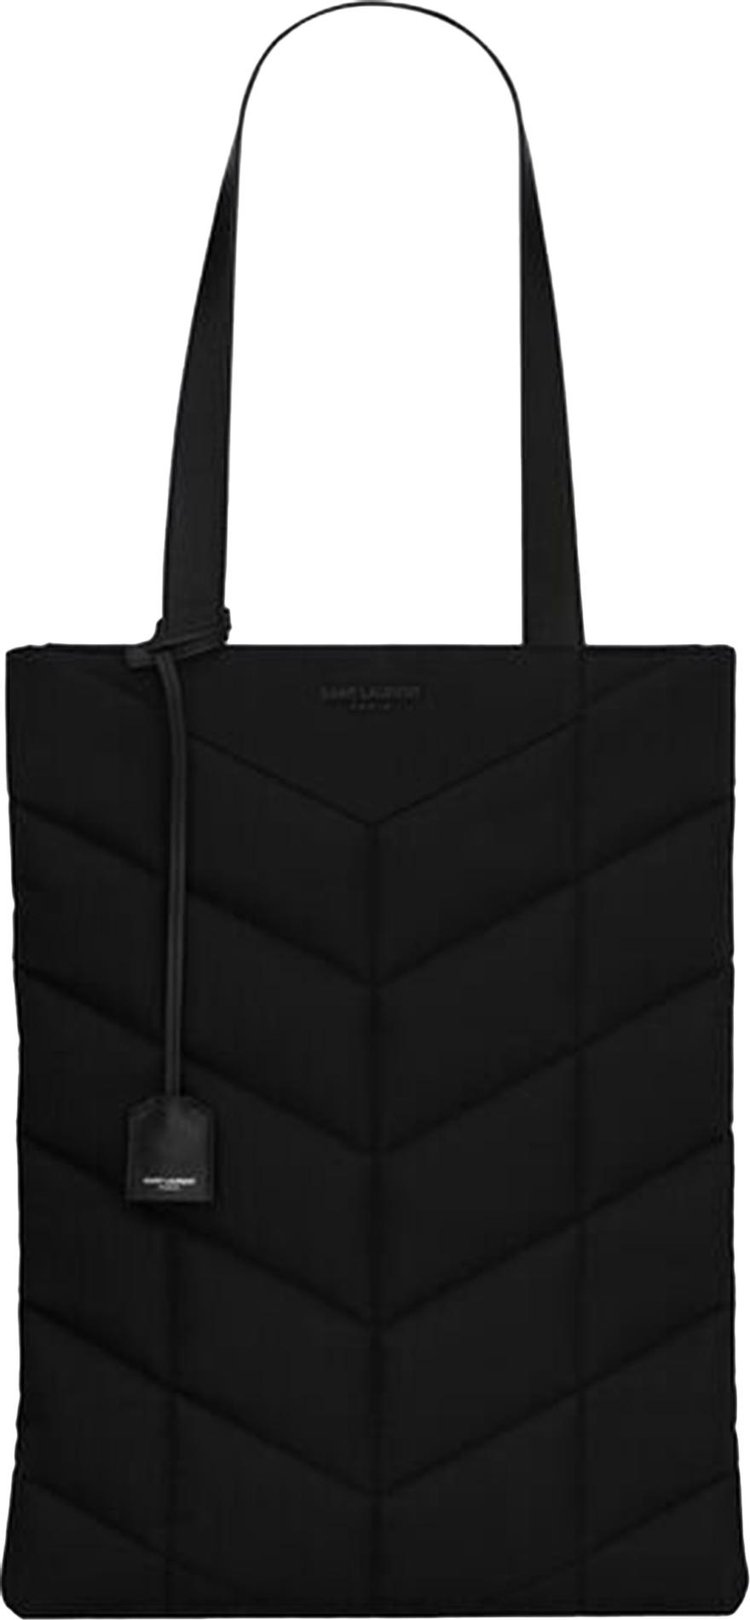 Saint Laurent Quilted Puffer Tote Bag in Black